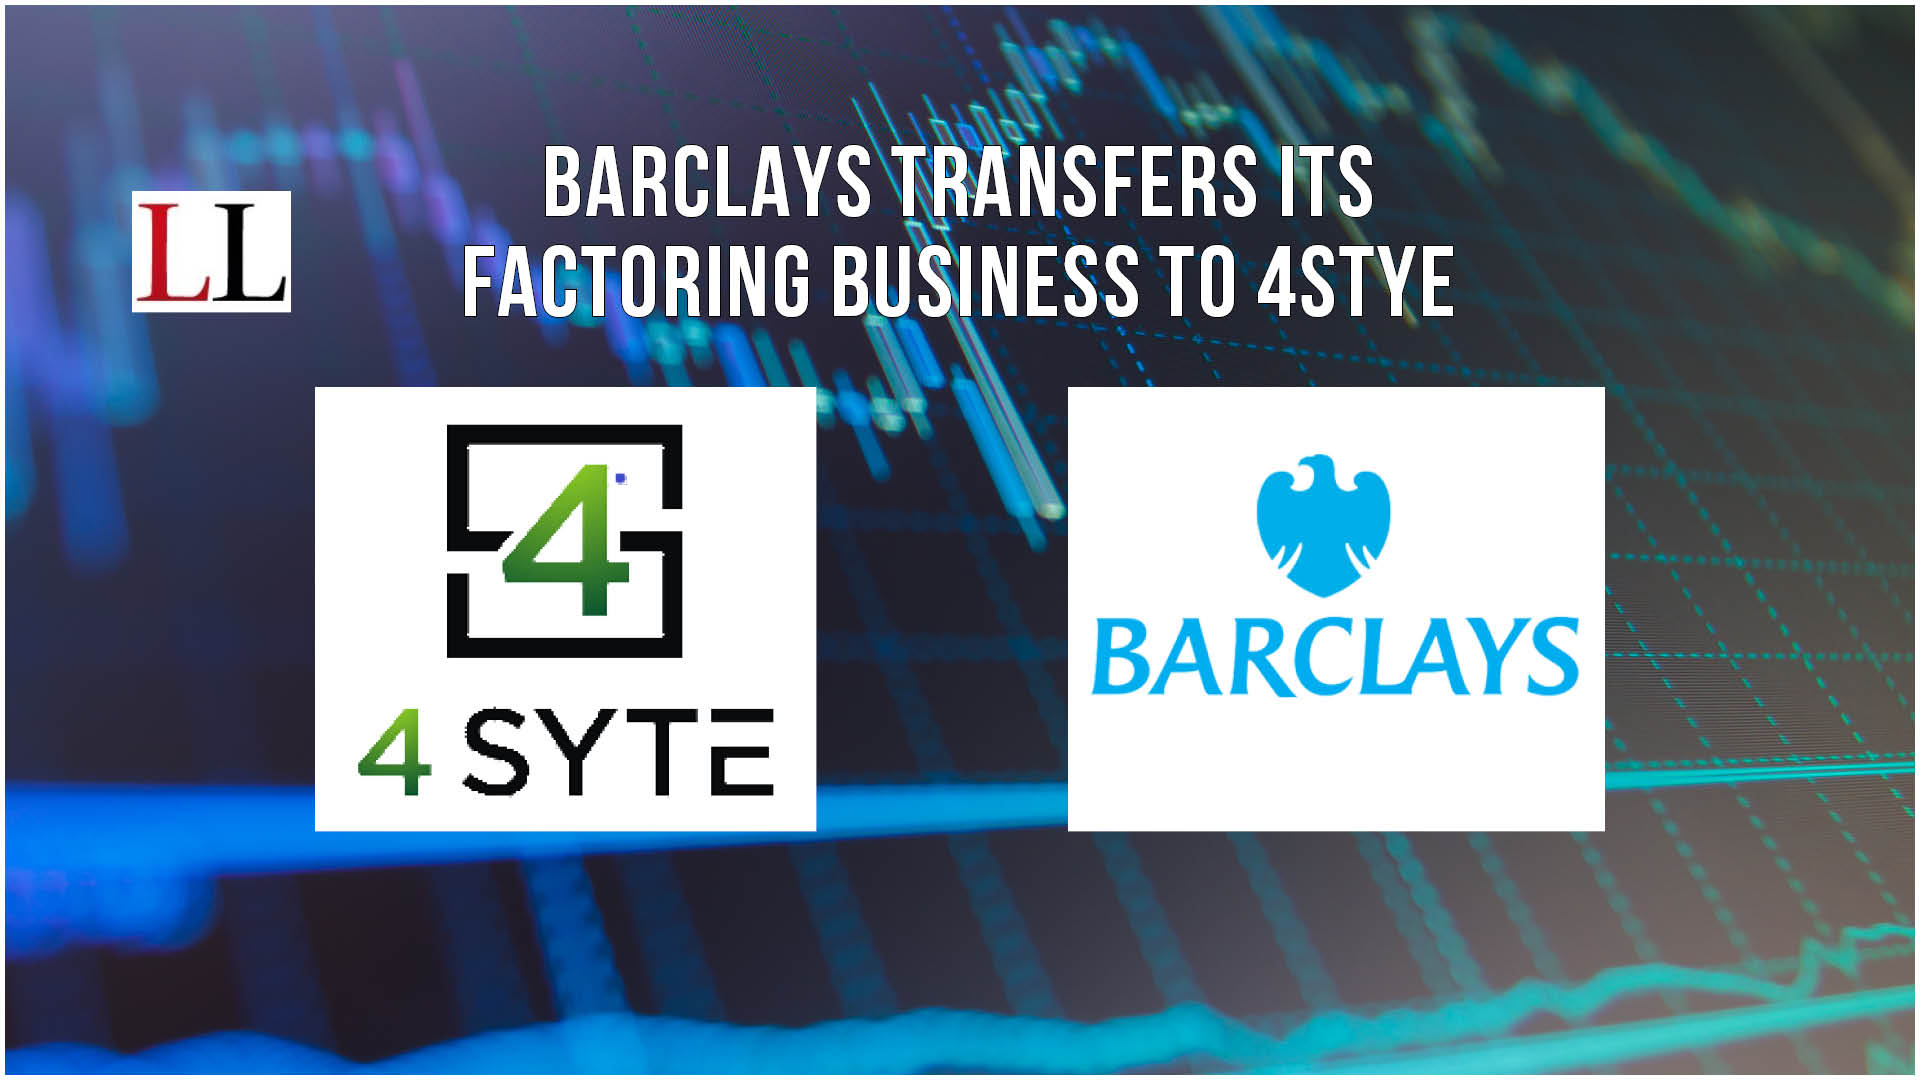 Barclays transfers its factoring business to 4Stye